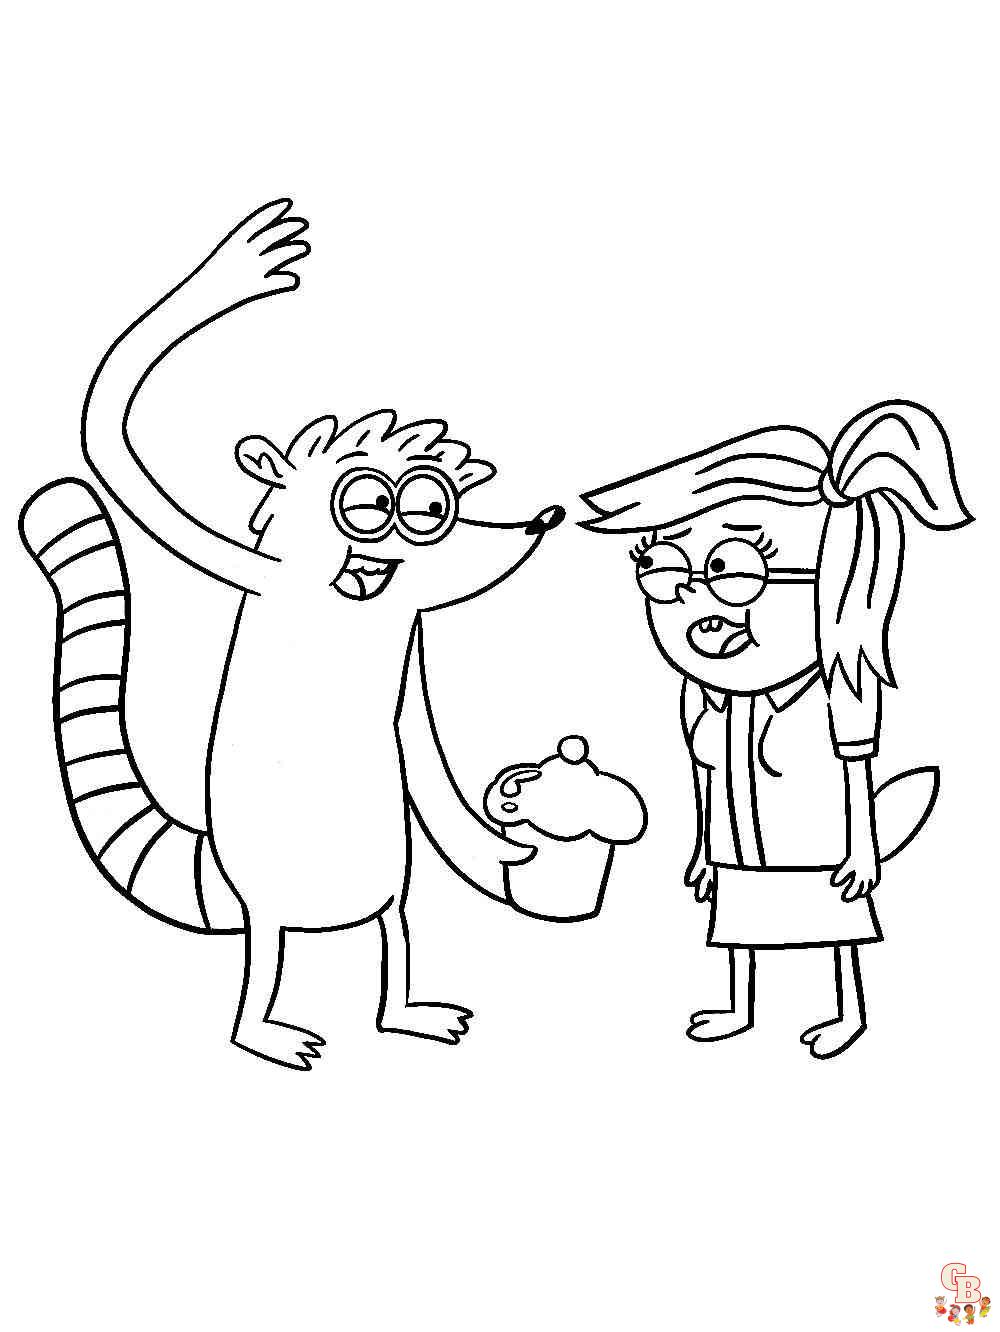 mordecai and rigby coloring pages